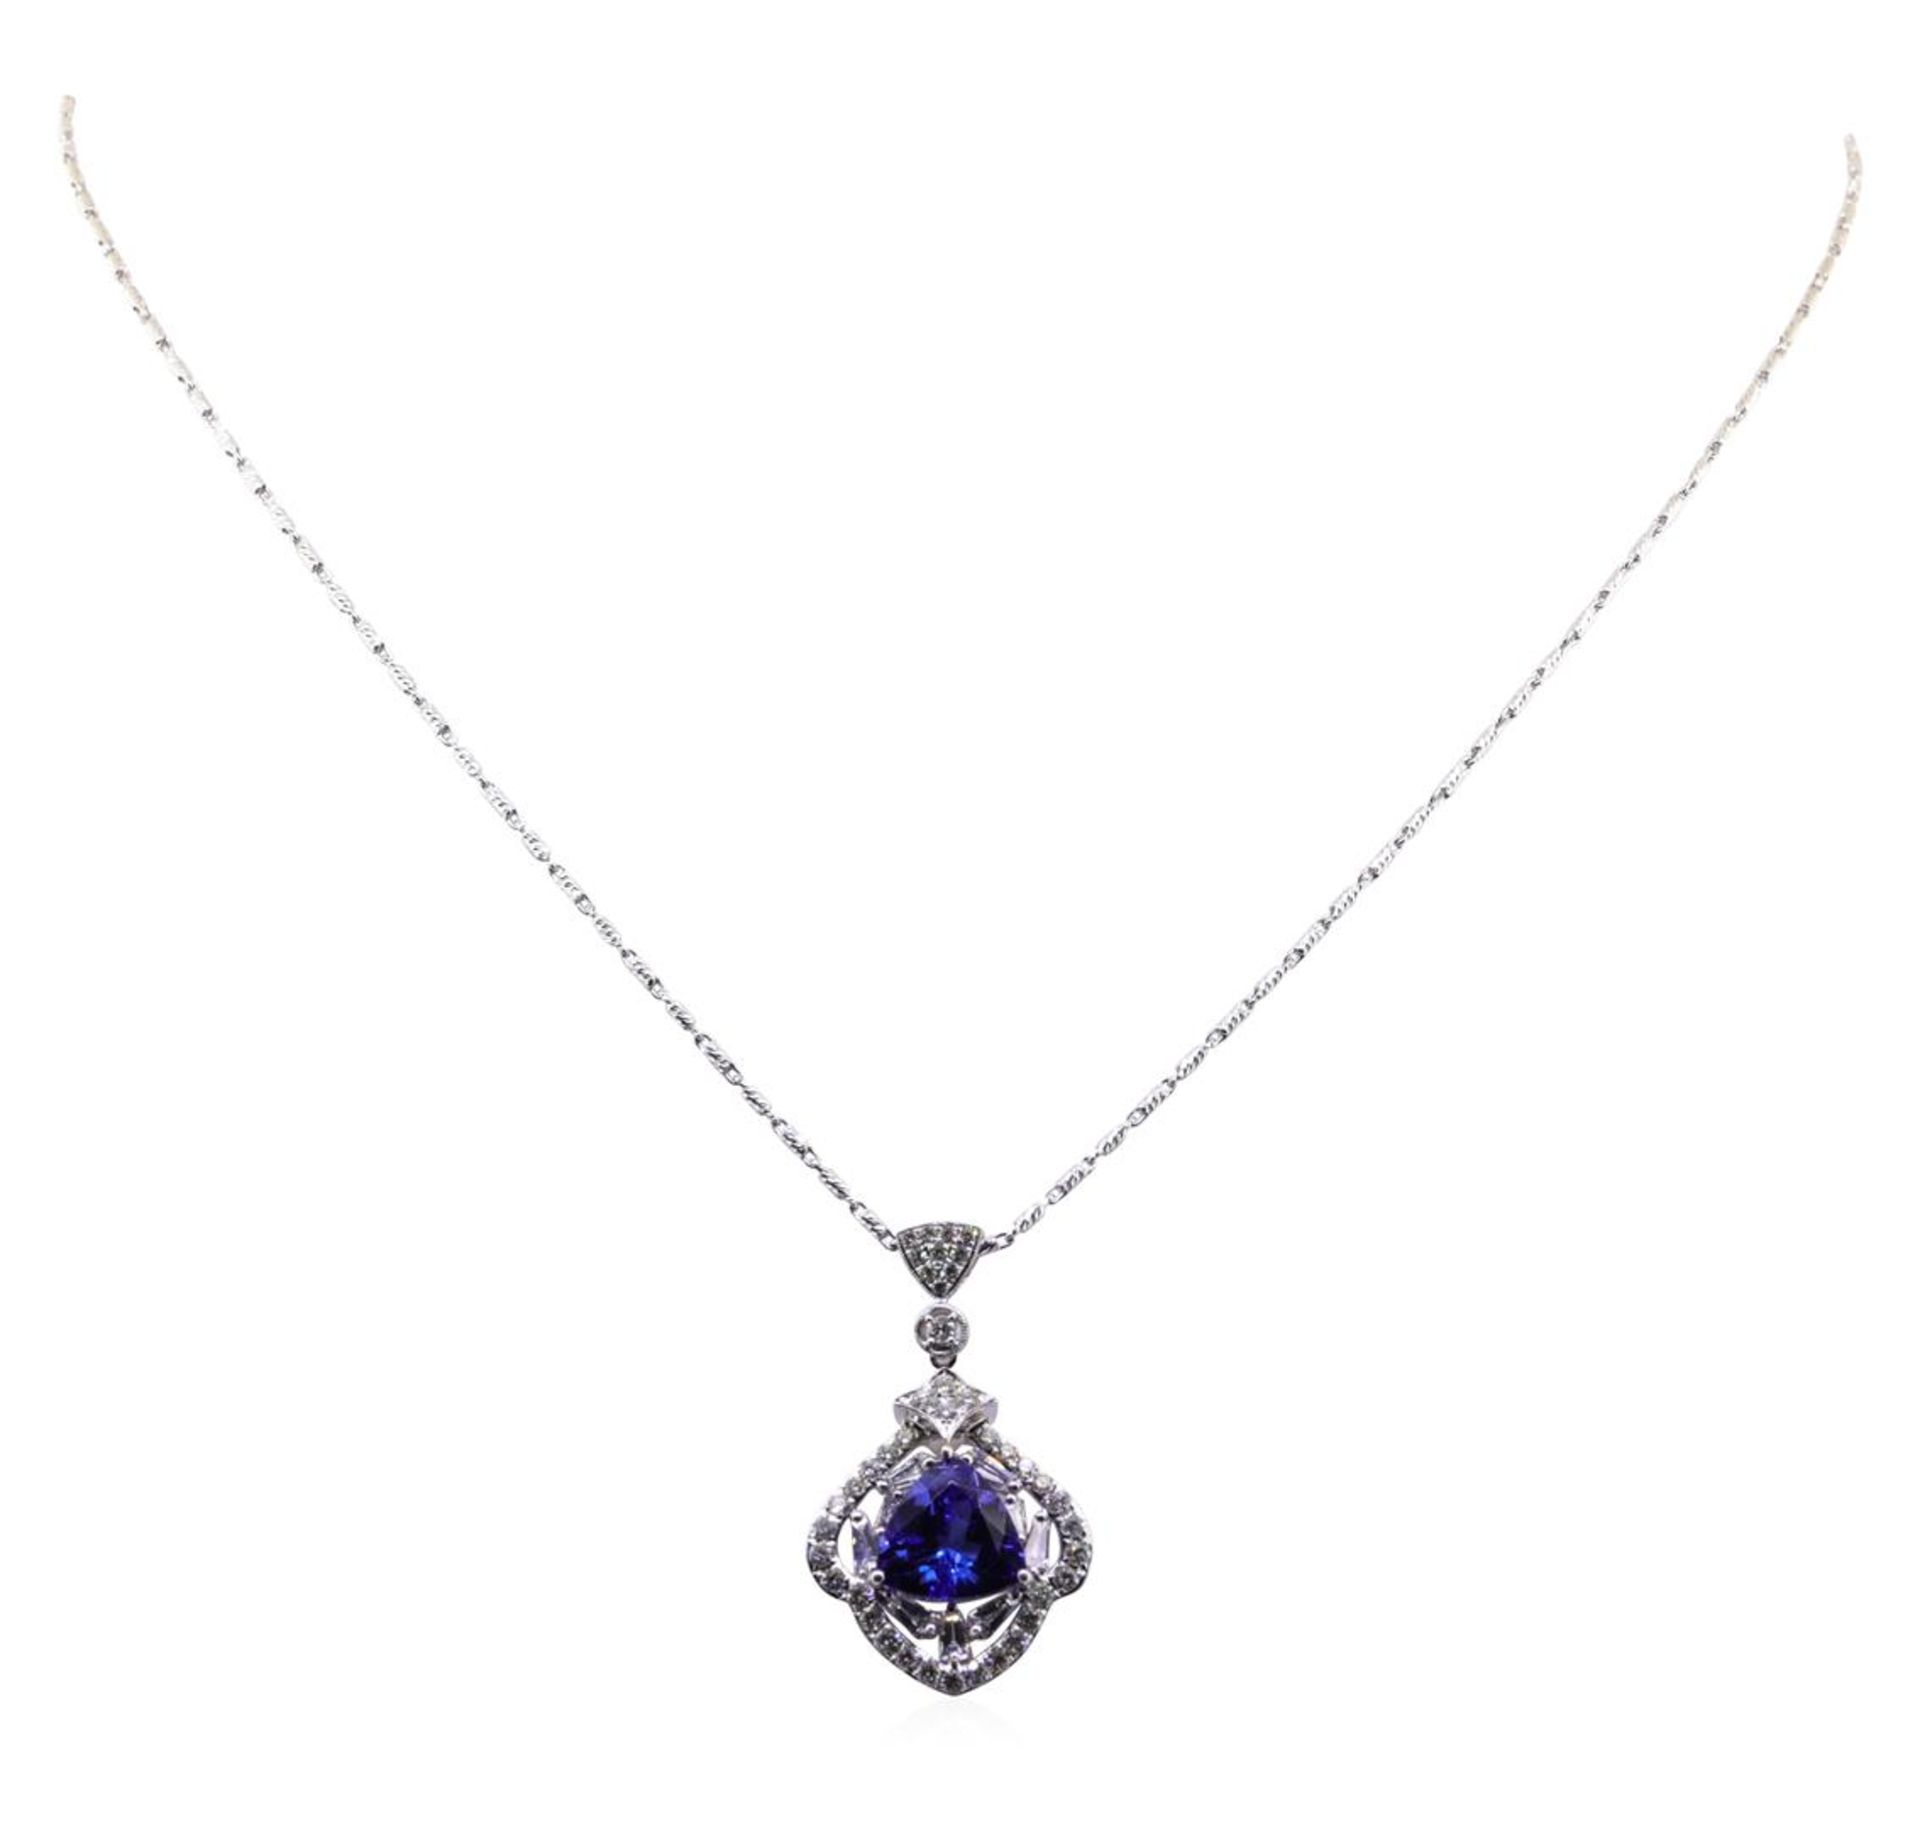 3.47 ctw Tanzanite and Diamond Pendant With Chain - 18KT White Gold - Image 2 of 3